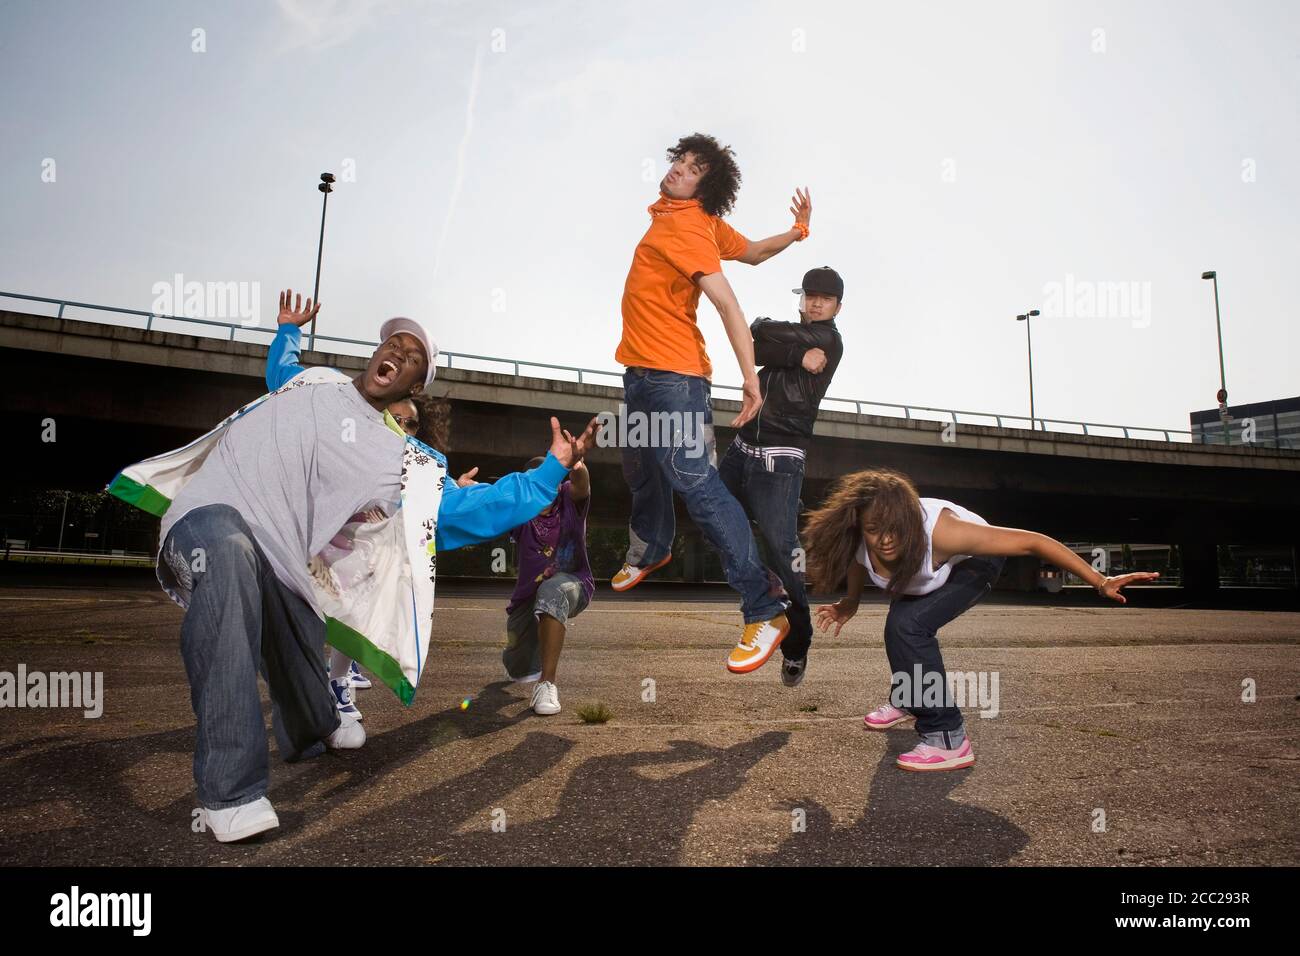 Germany, Cologne, Group of people breakdancing on street Stock Photo